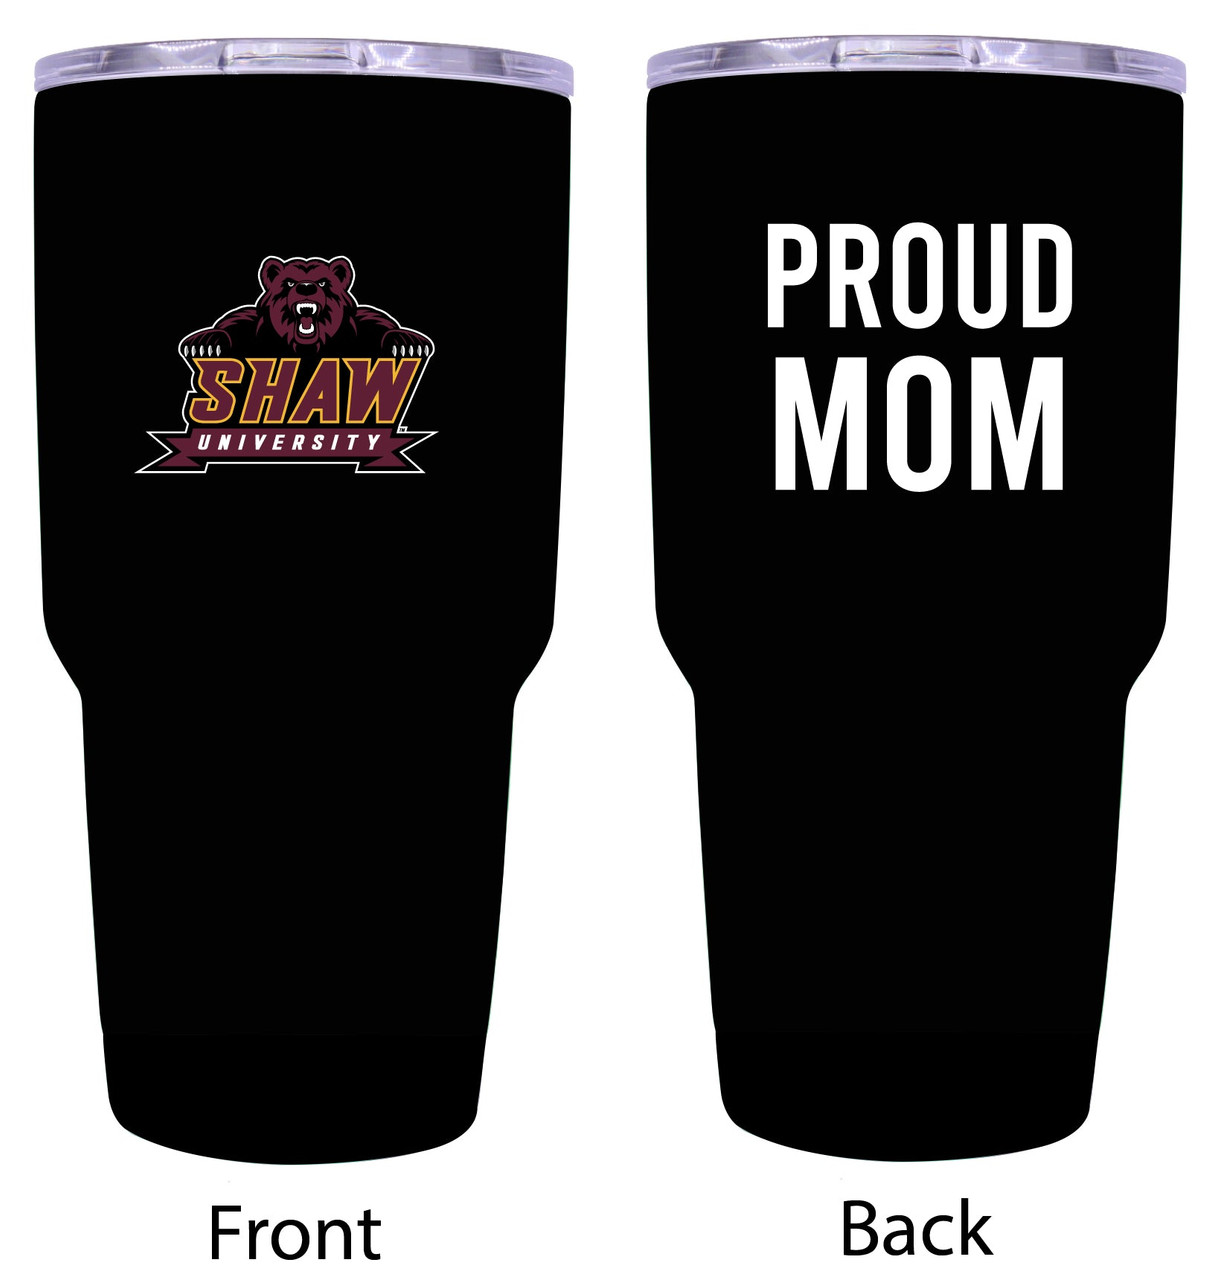 Shaw University Bears Proud Mom 24 oz Insulated Stainless Steel Tumblers Choose Your Color.